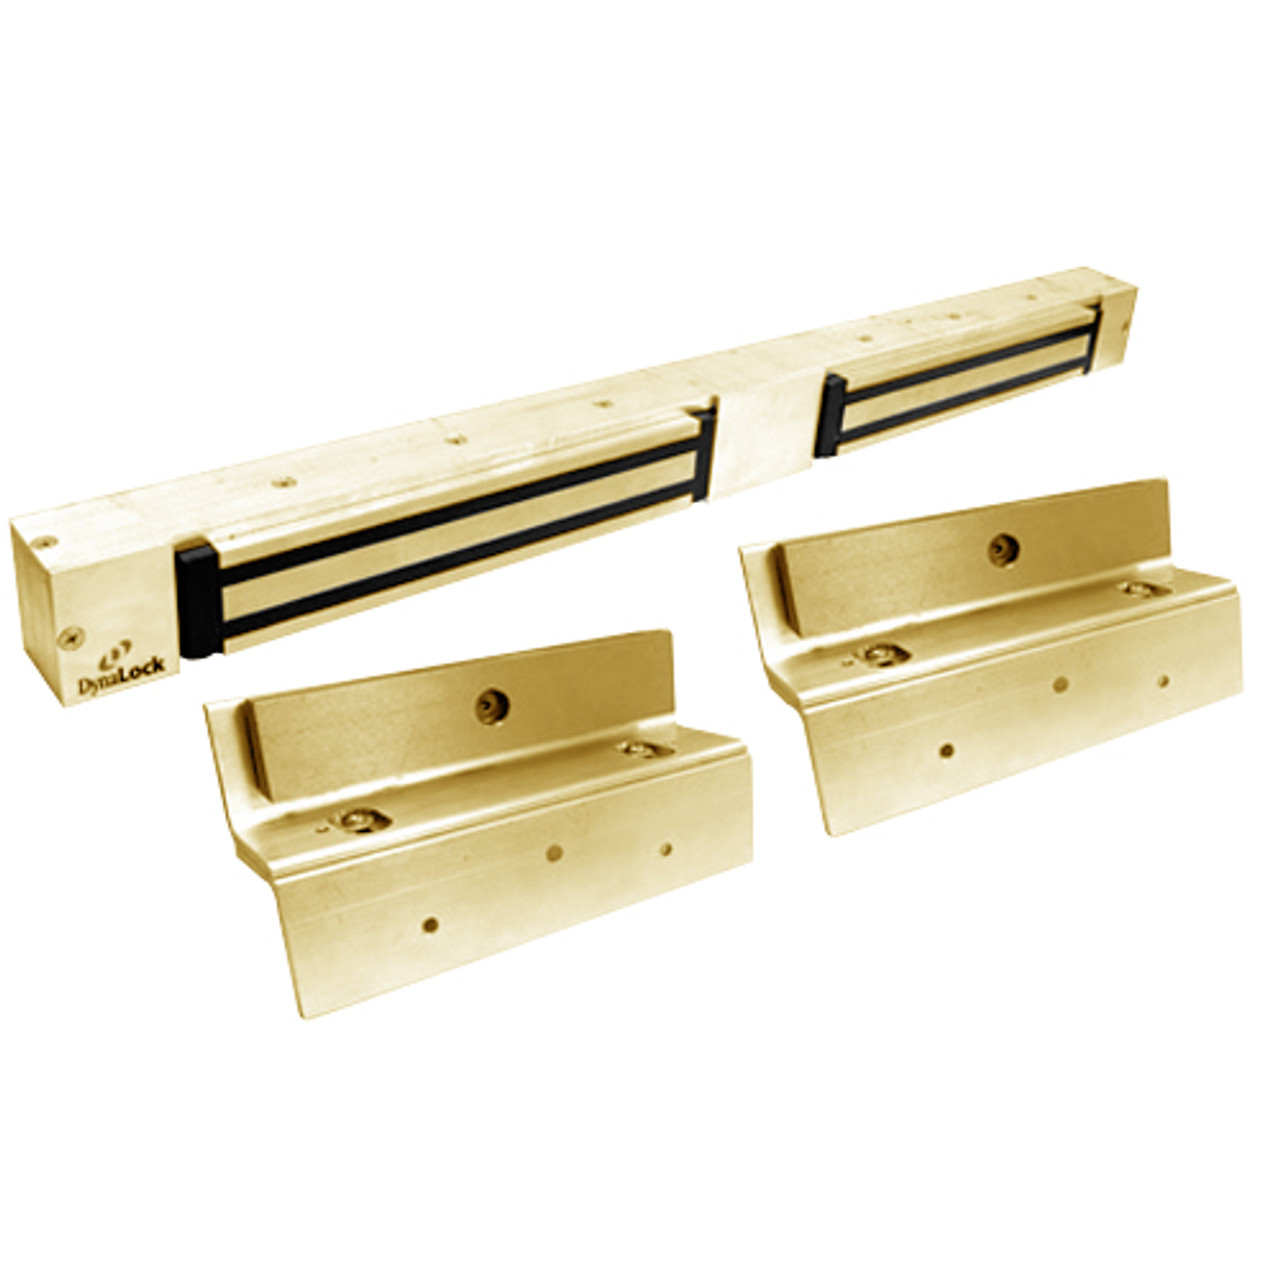 2268-TJ20-US3 DynaLock 2268 Series Double Classic Low Profile Electromagnetic Lock for Inswing Door in Bright Brass